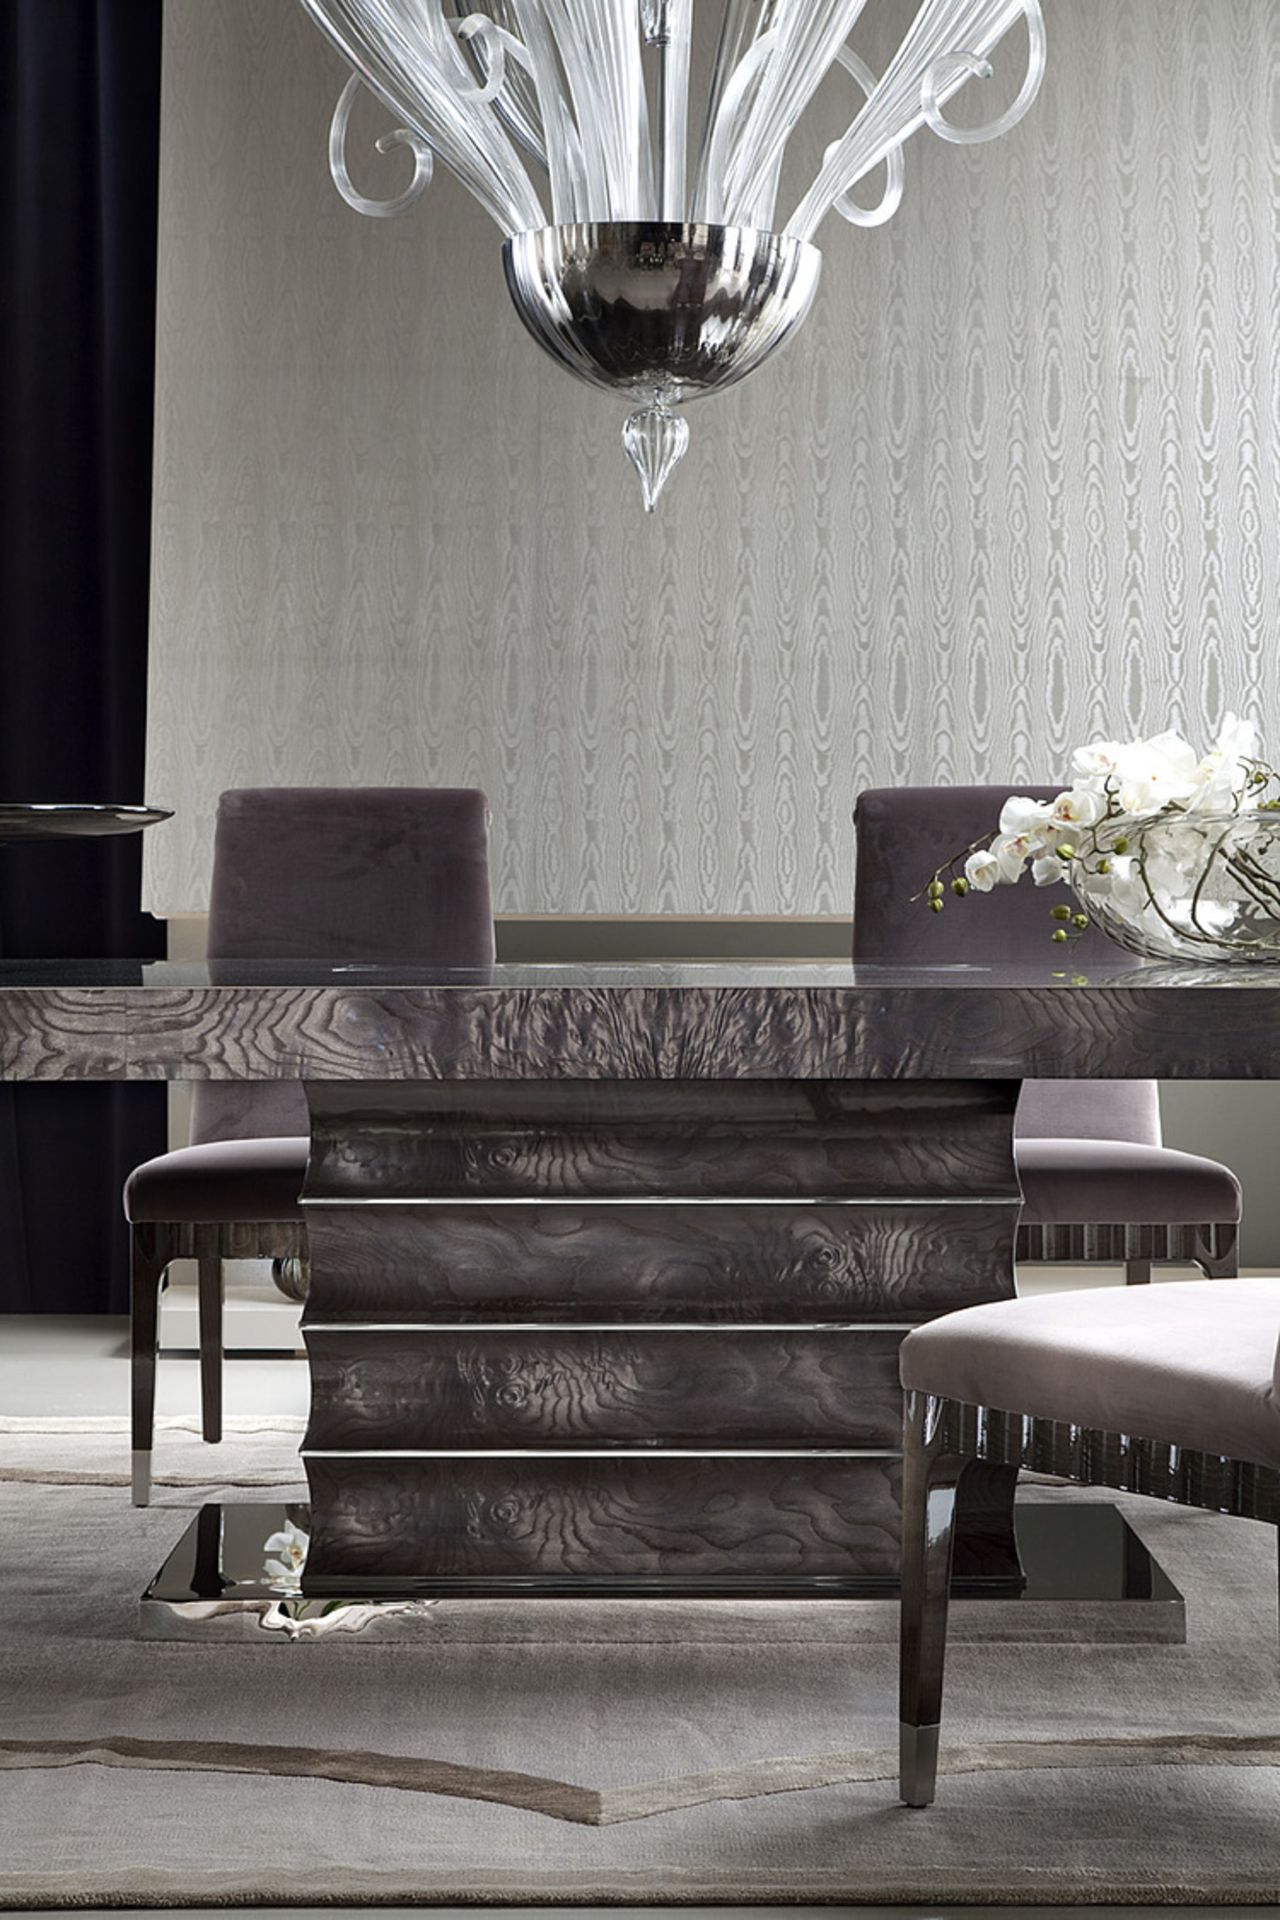 1 x Giorgio Absolute Dining Extension Table 4000 – Mako Japanese Tamos Burl Veneer With a High Gloss - Image 15 of 23